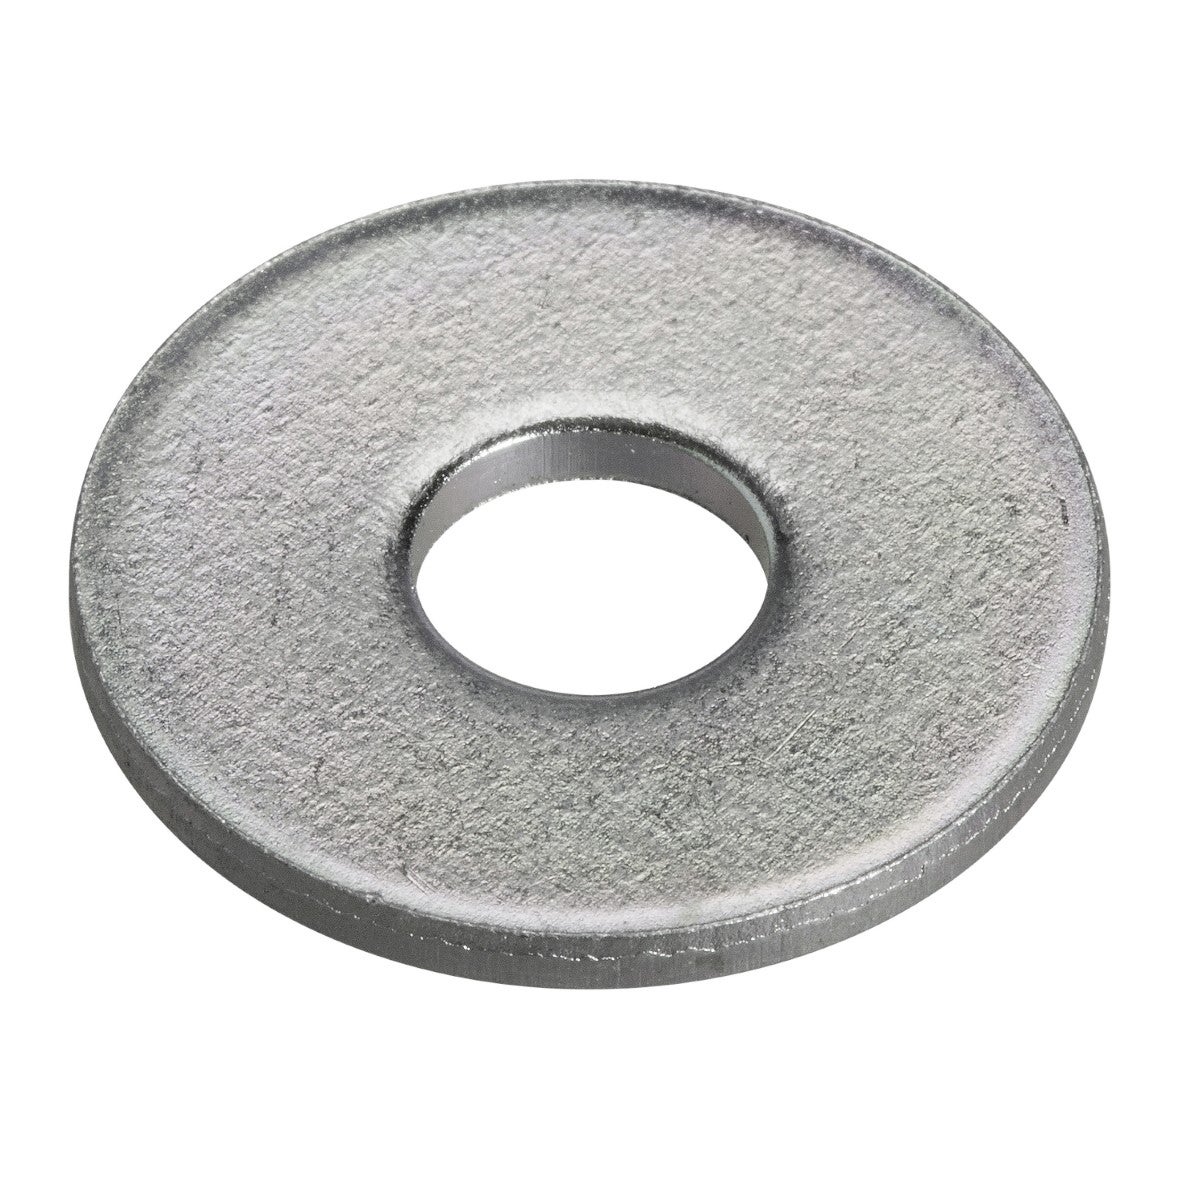 Flat washer, Linergy LGY, M8, 28mm dia, for flexible busbar, set of 20